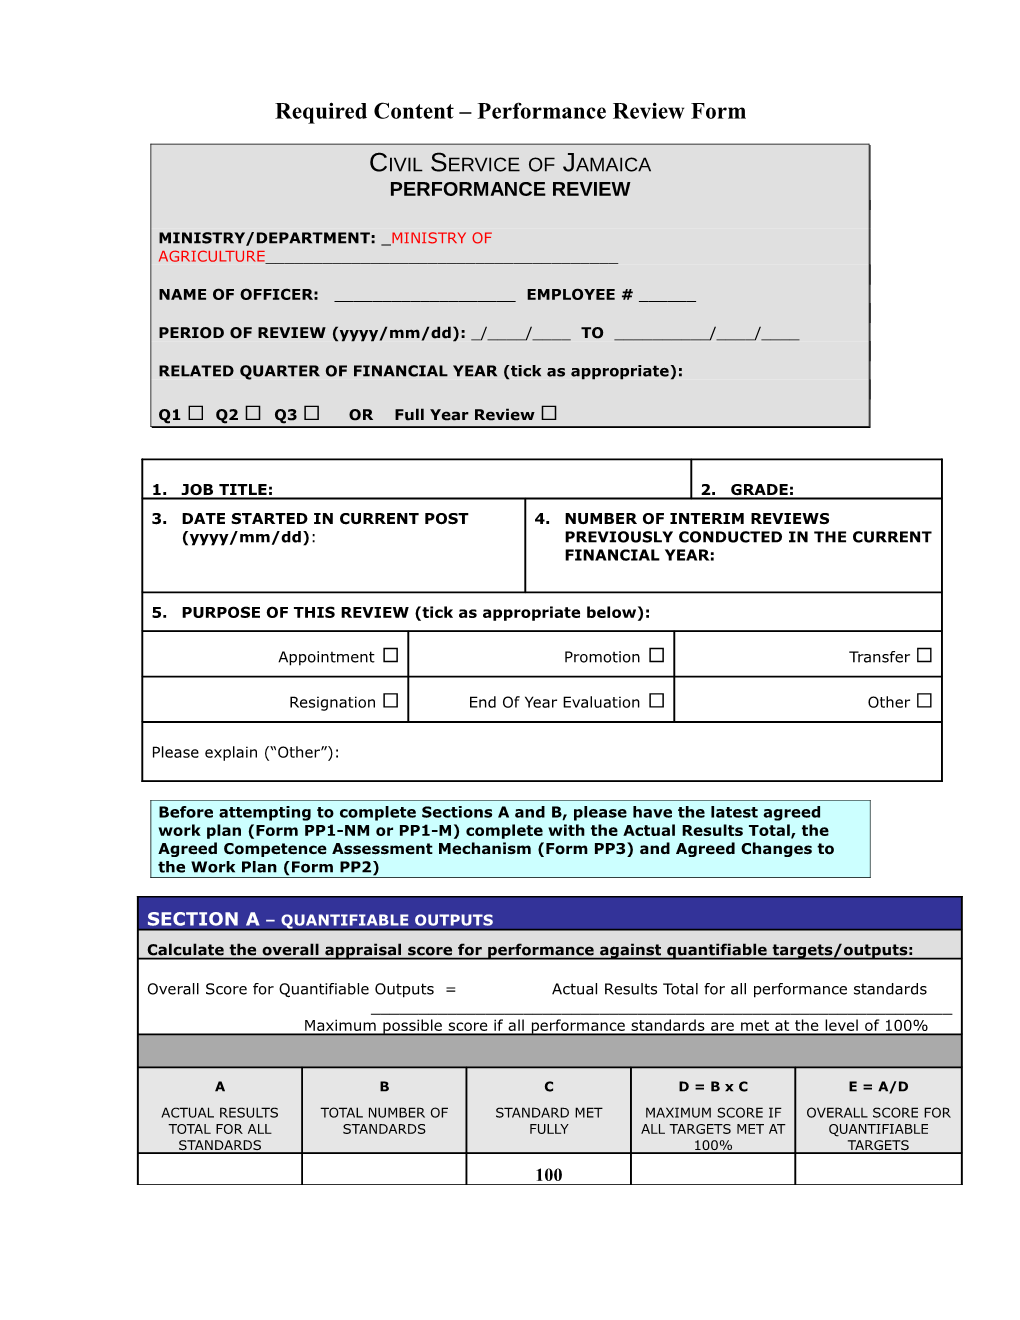 Required Content Performance Review Form